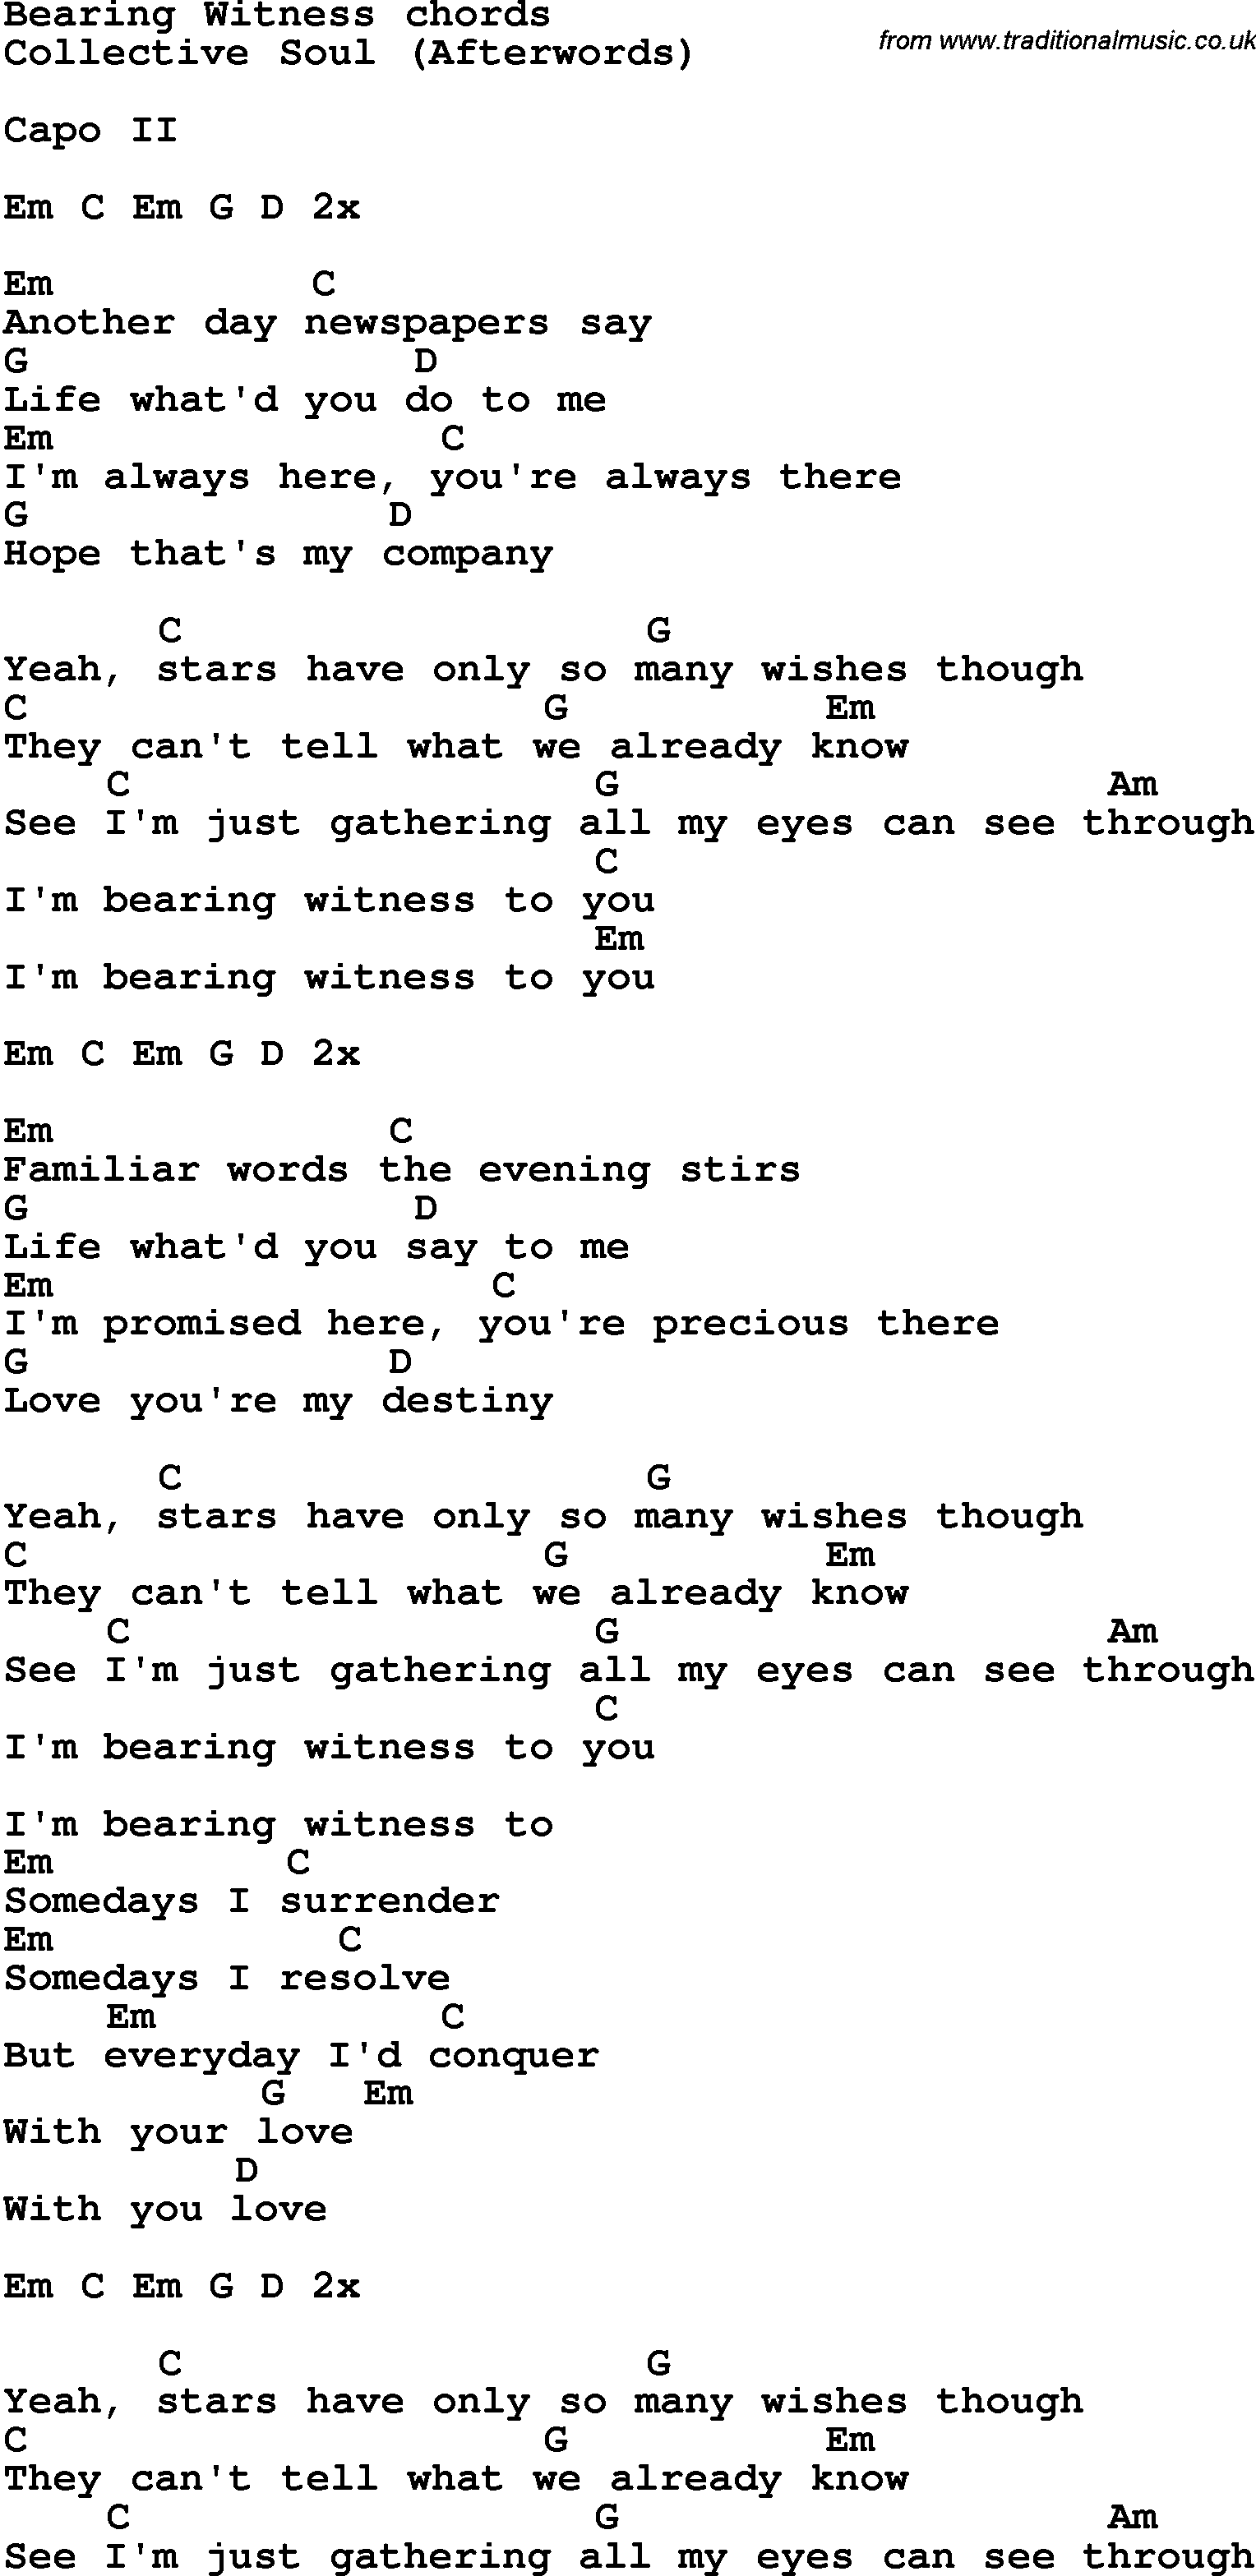 Song Lyrics with guitar chords for Bearing Witness